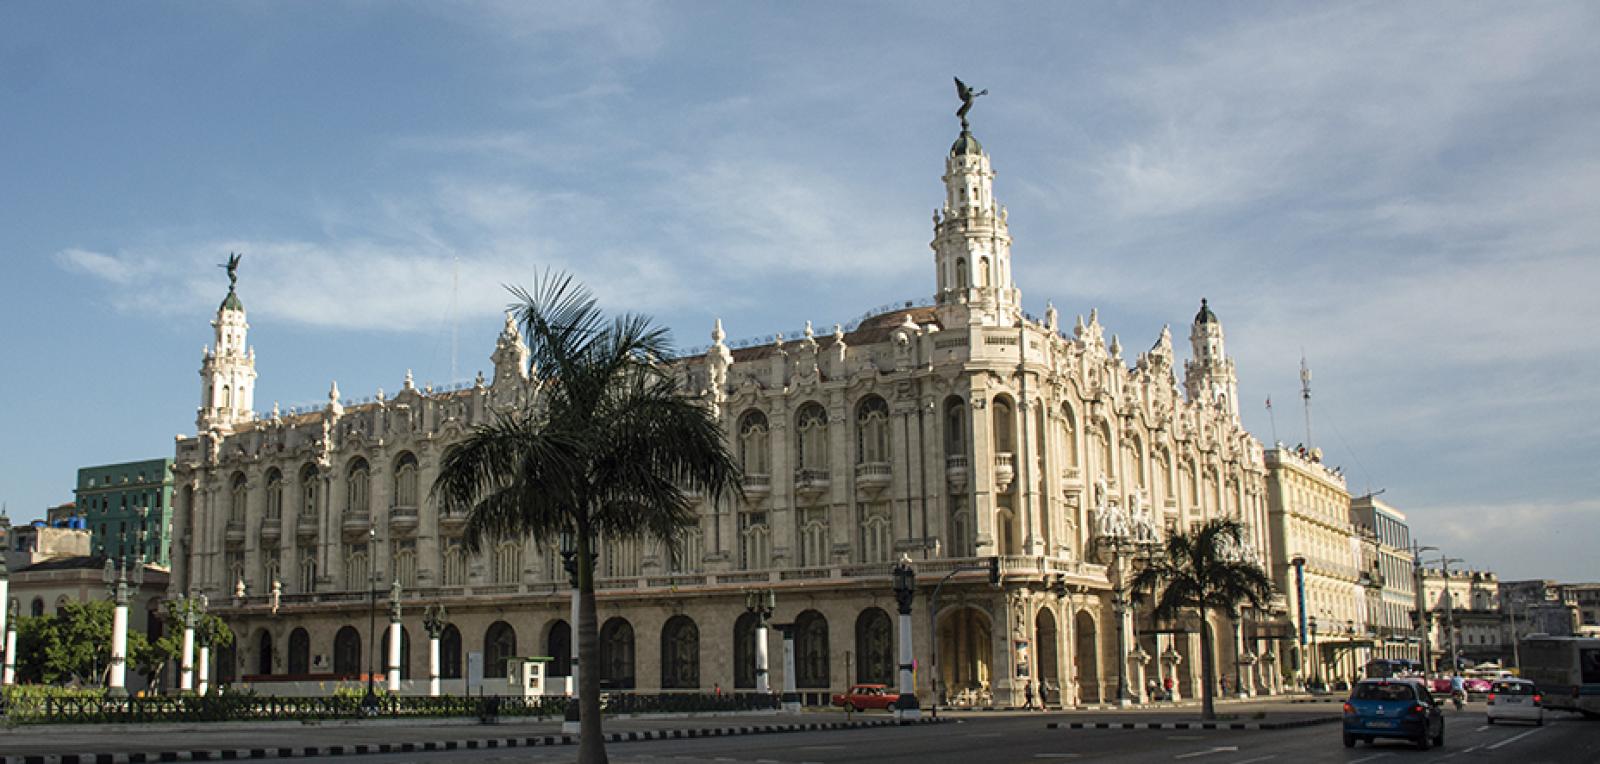 A living and creative theater in Cuba